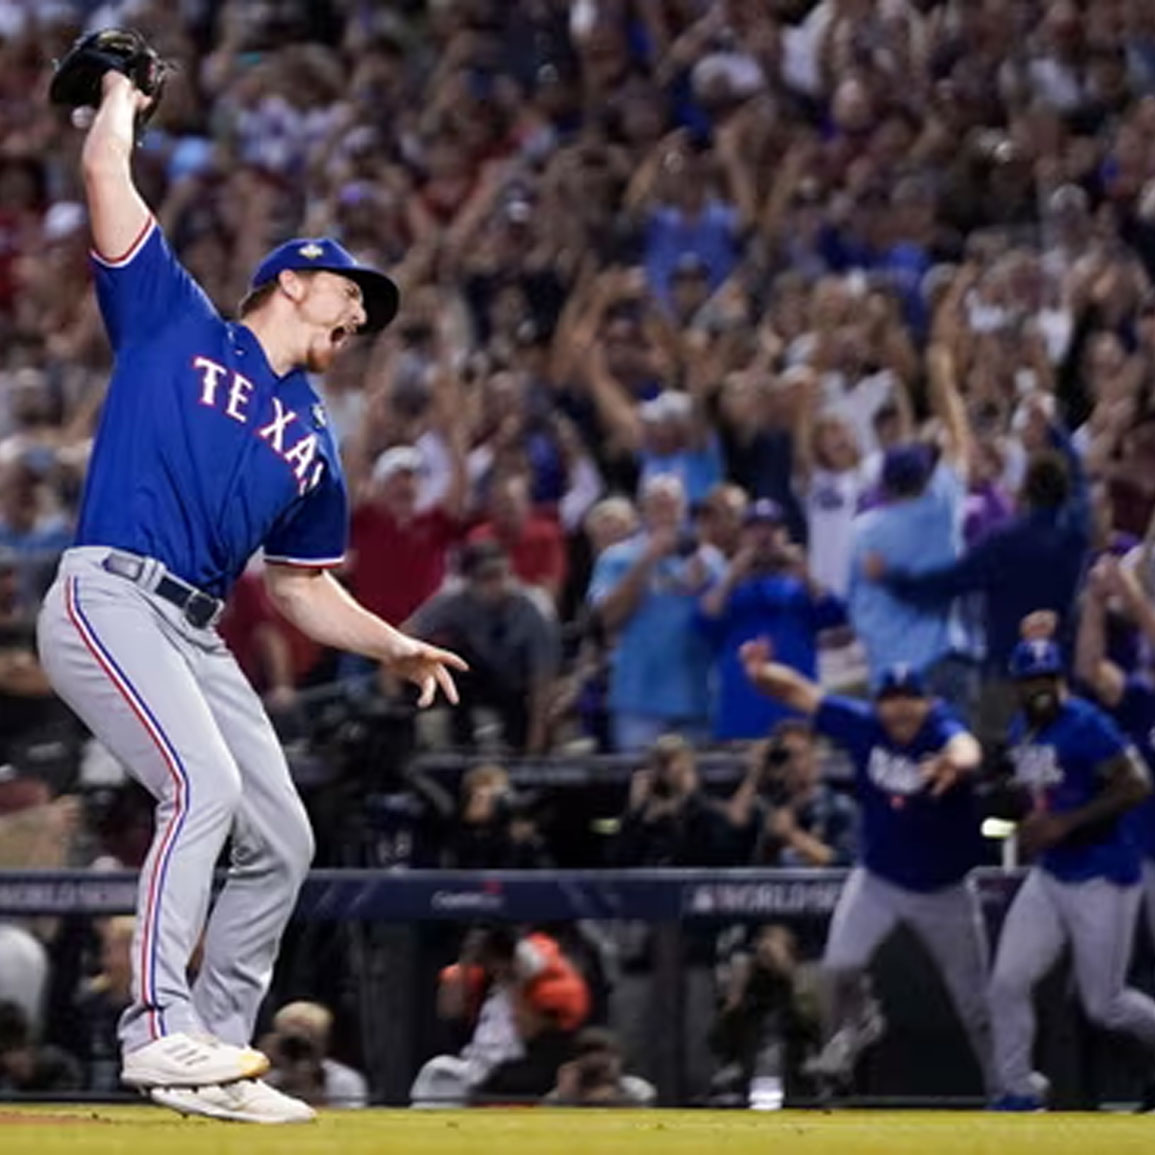 Texas Rangers clinch their inaugural World Series championship after 63 years of waiting